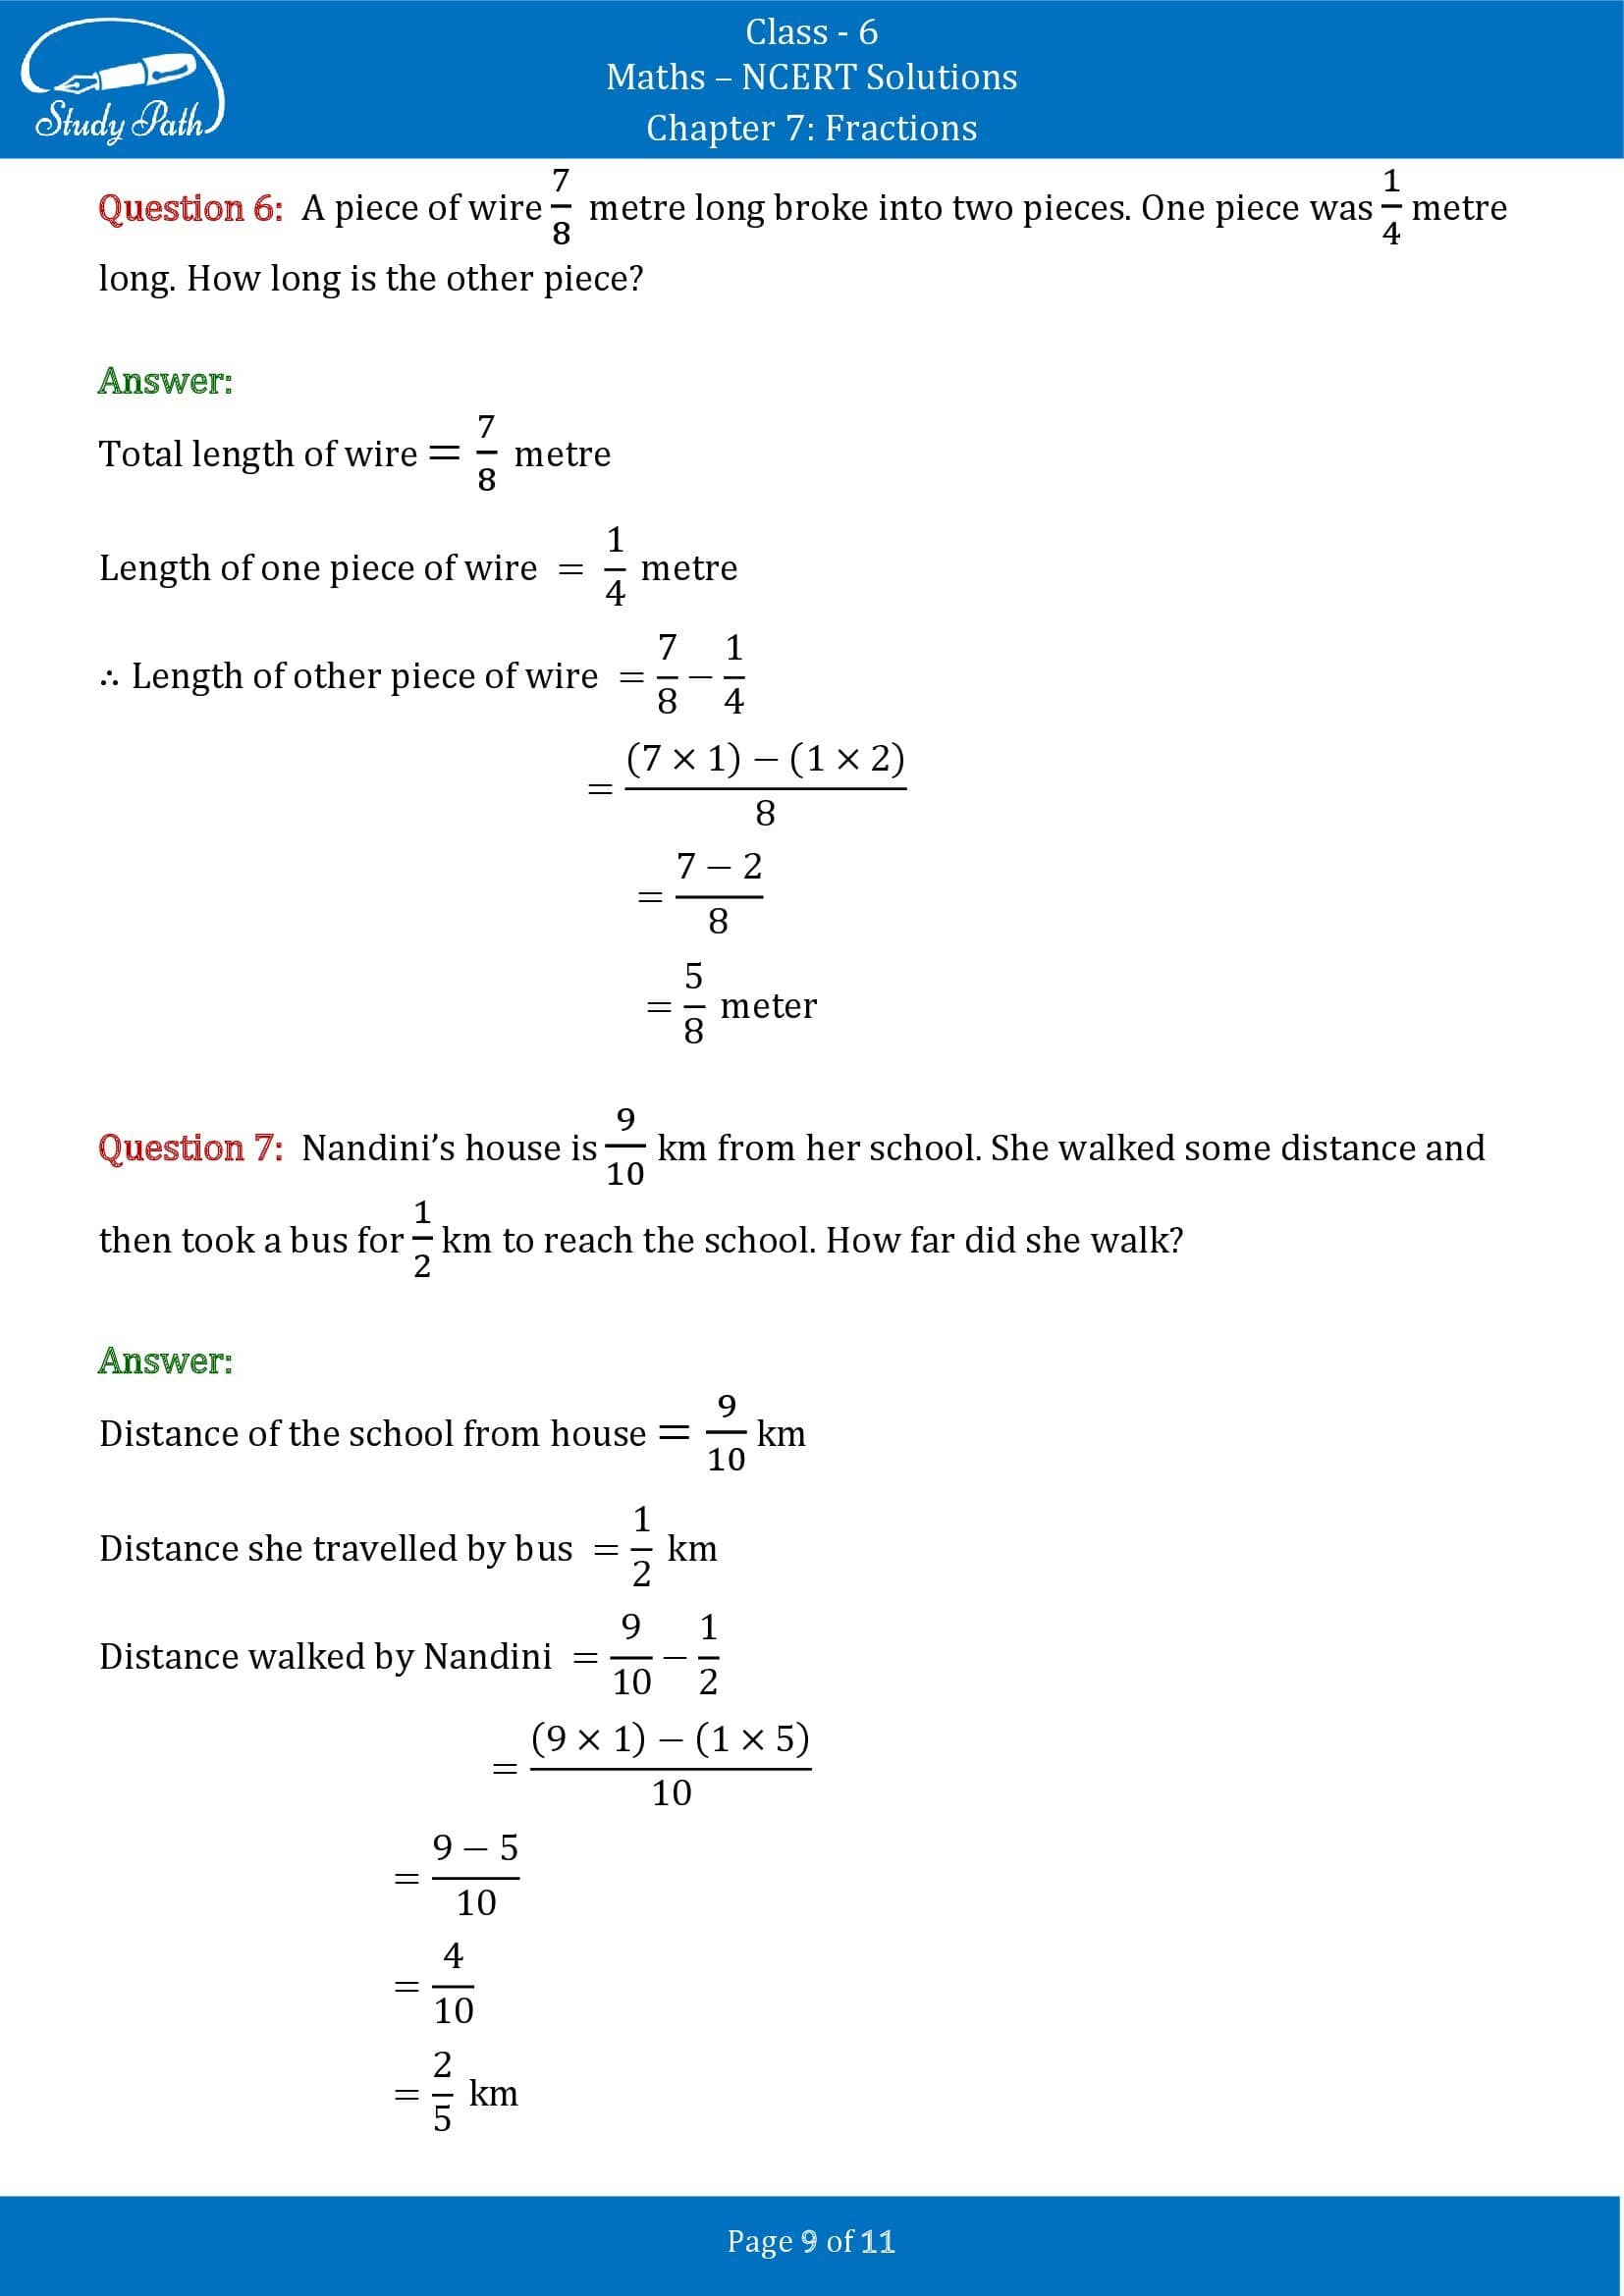 NCERT Solutions for Class 6 Maths Chapter 7 Fractions Exercise 7.6 0009